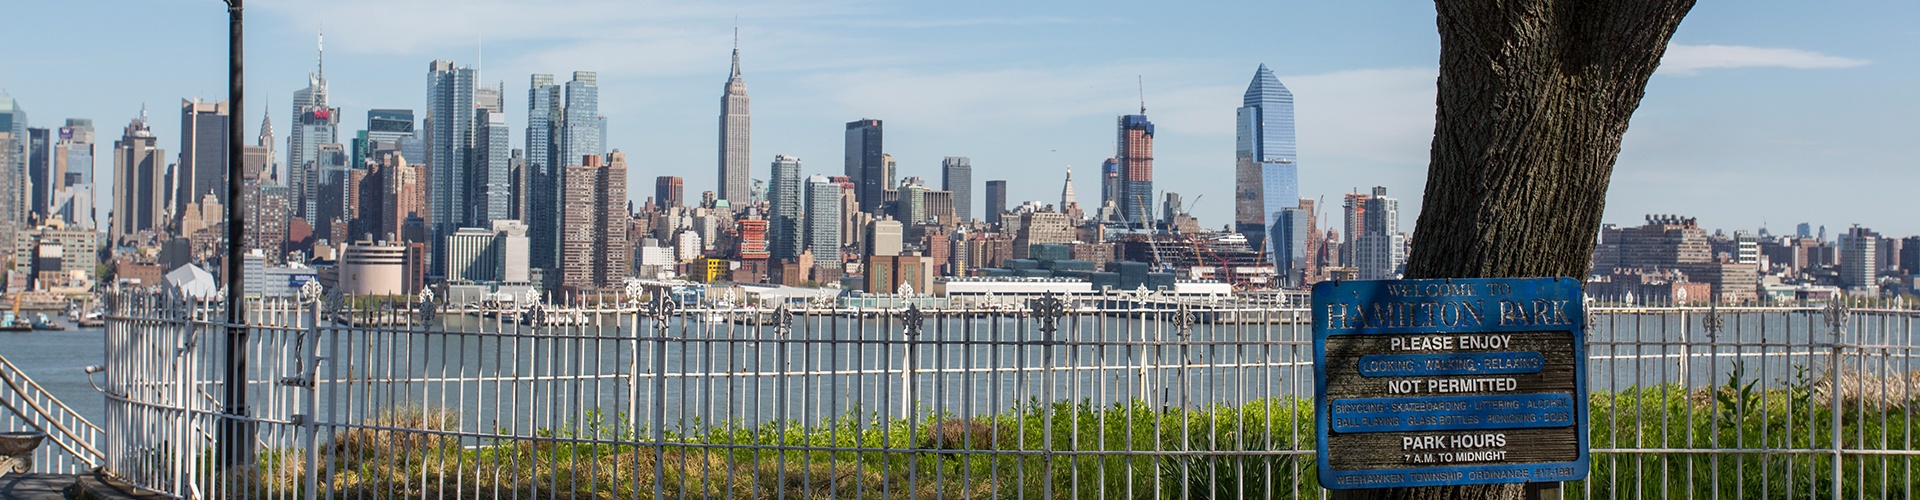 Weehawken Rentals: 5 Things to Know About Weehawken, NJ